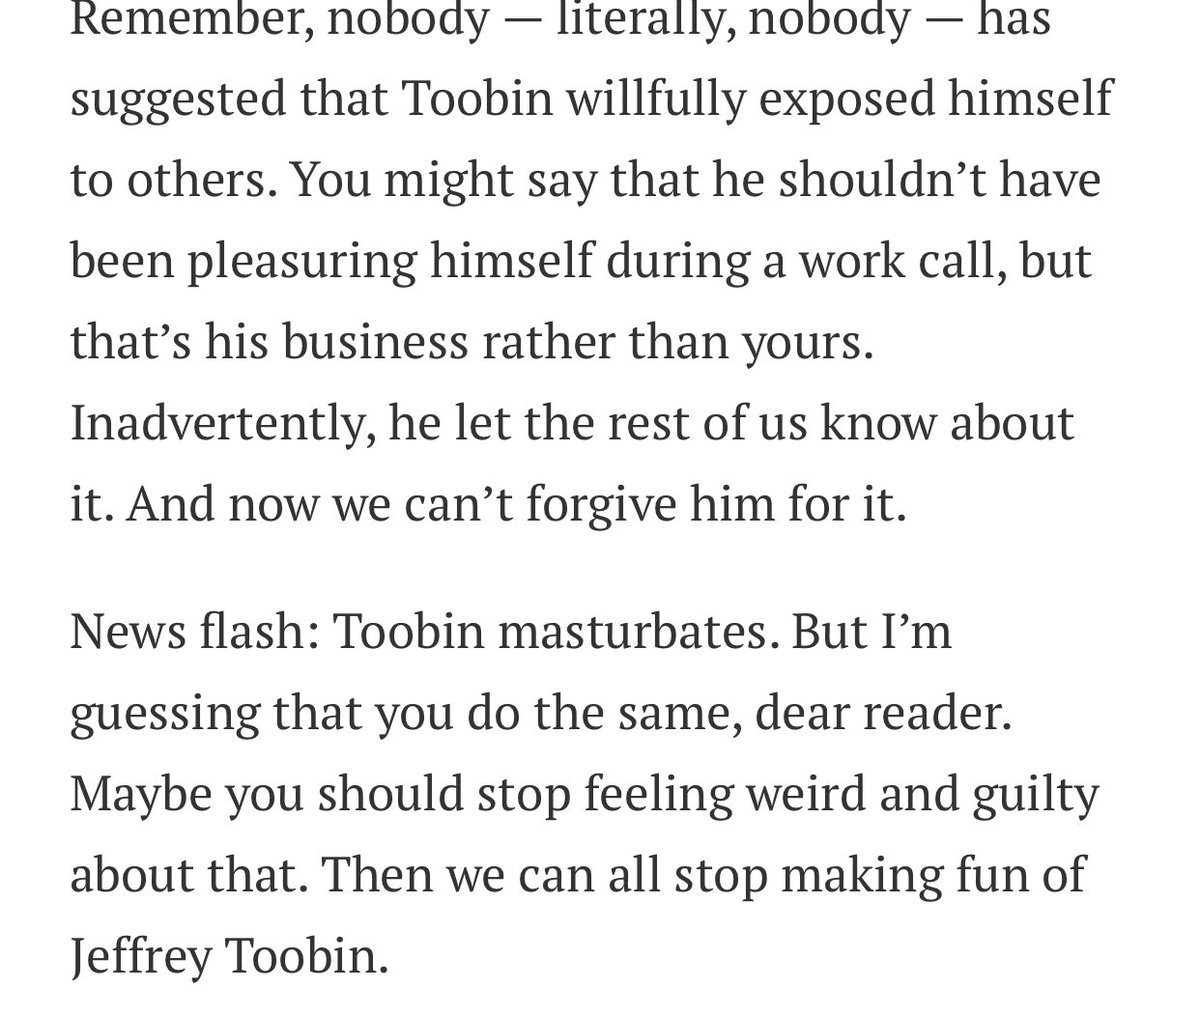 If you’re mocking Toobin or if you think maybe dudes should quit “accidentally” jerking it on work zoom calls, you’re *squints*—just a prude and should probably masturbate more.   https://www.nydailynews.com/opinion/ny-oped-toobin-and-the-m-word-20201021-sdm3nfc5ejgvxocmyb4r4iuknq-story.html